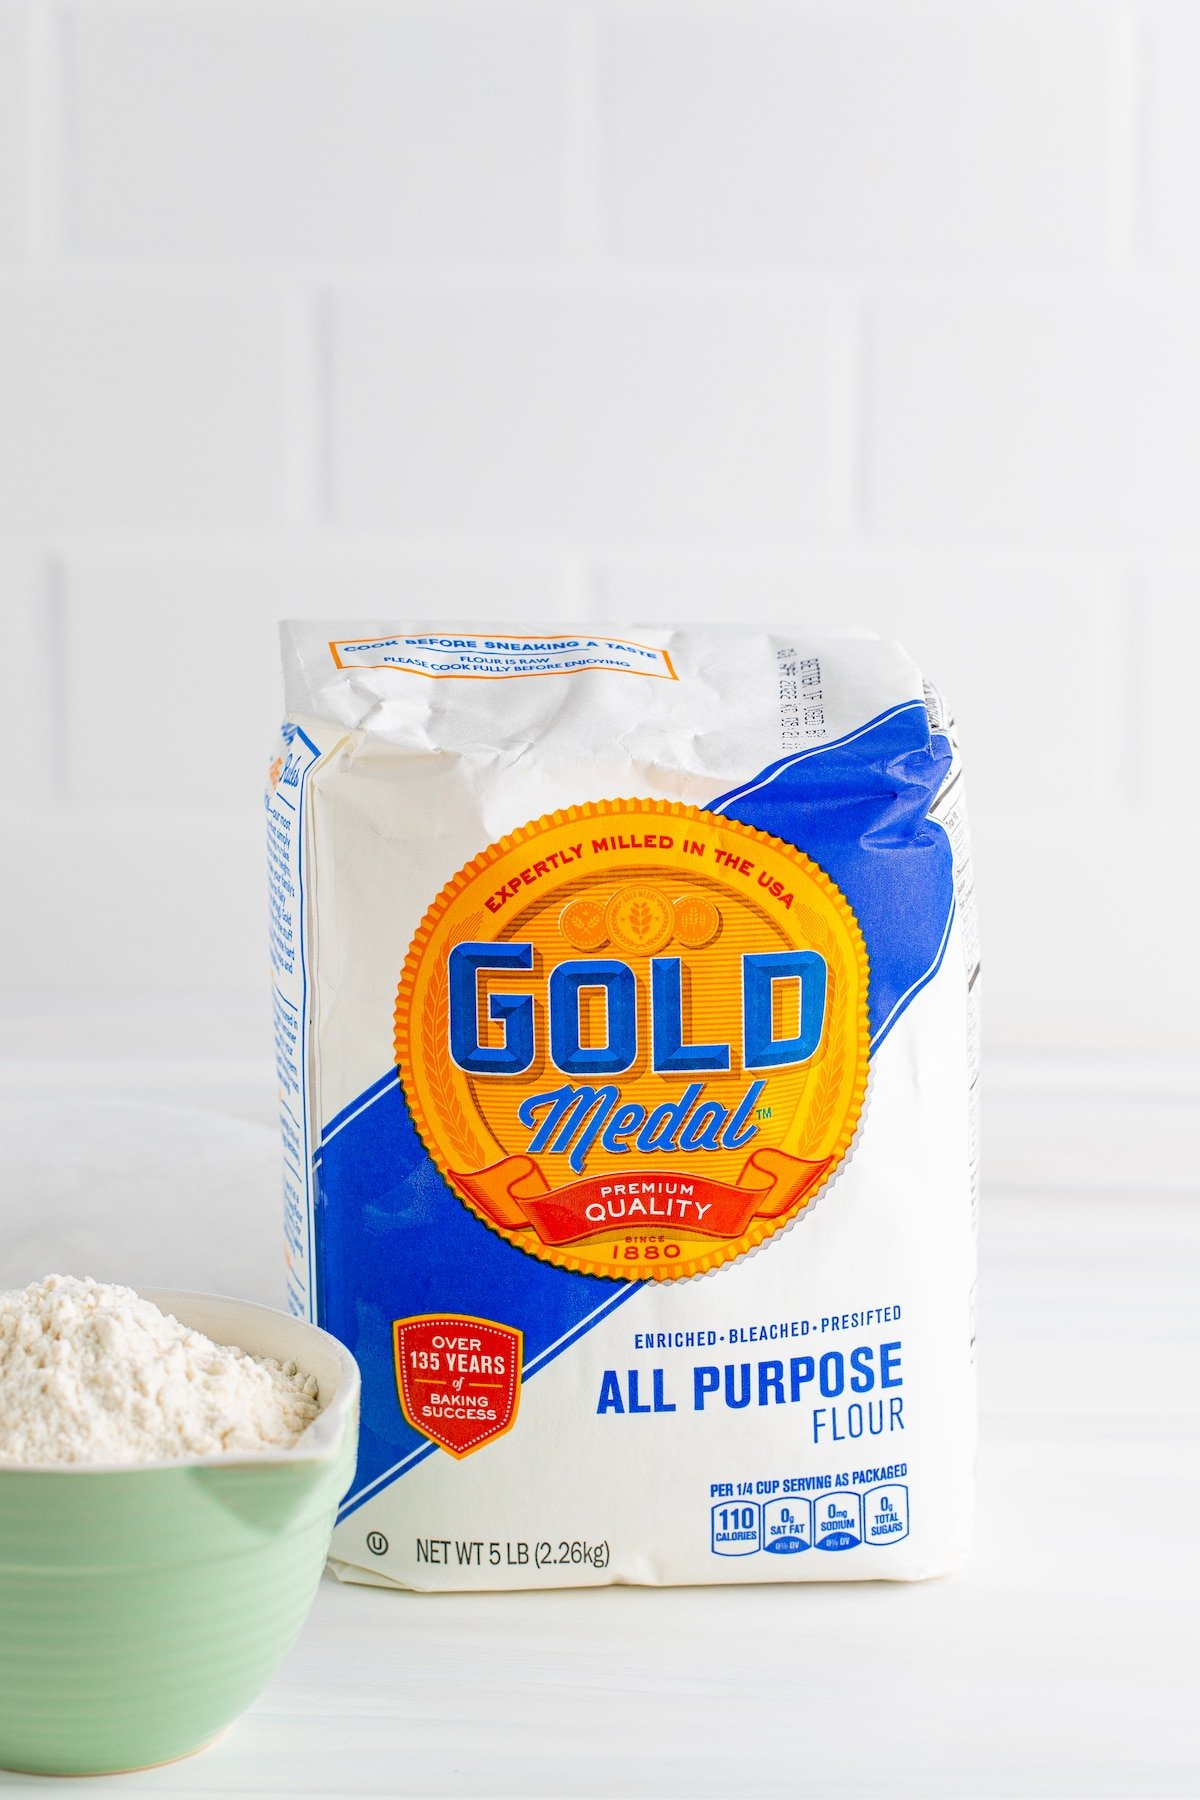 All purpose flour in the bag sitting next to a bowl full of flour